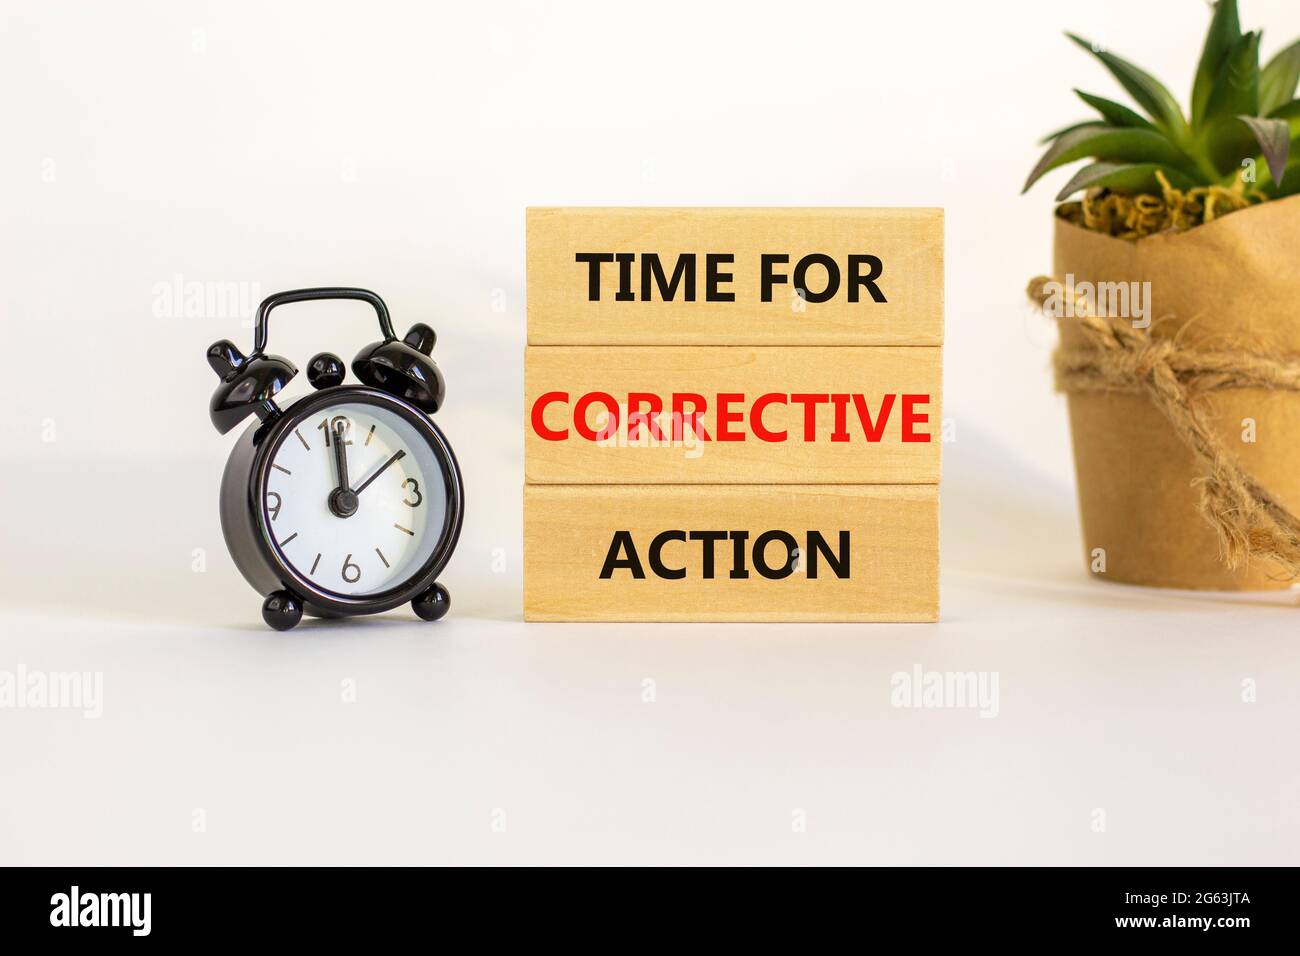 Time for corrective action symbol. Blocks with words time for corrective action. Black alarm clock, house plant. Beautiful white background. Copy spac Stock Photo